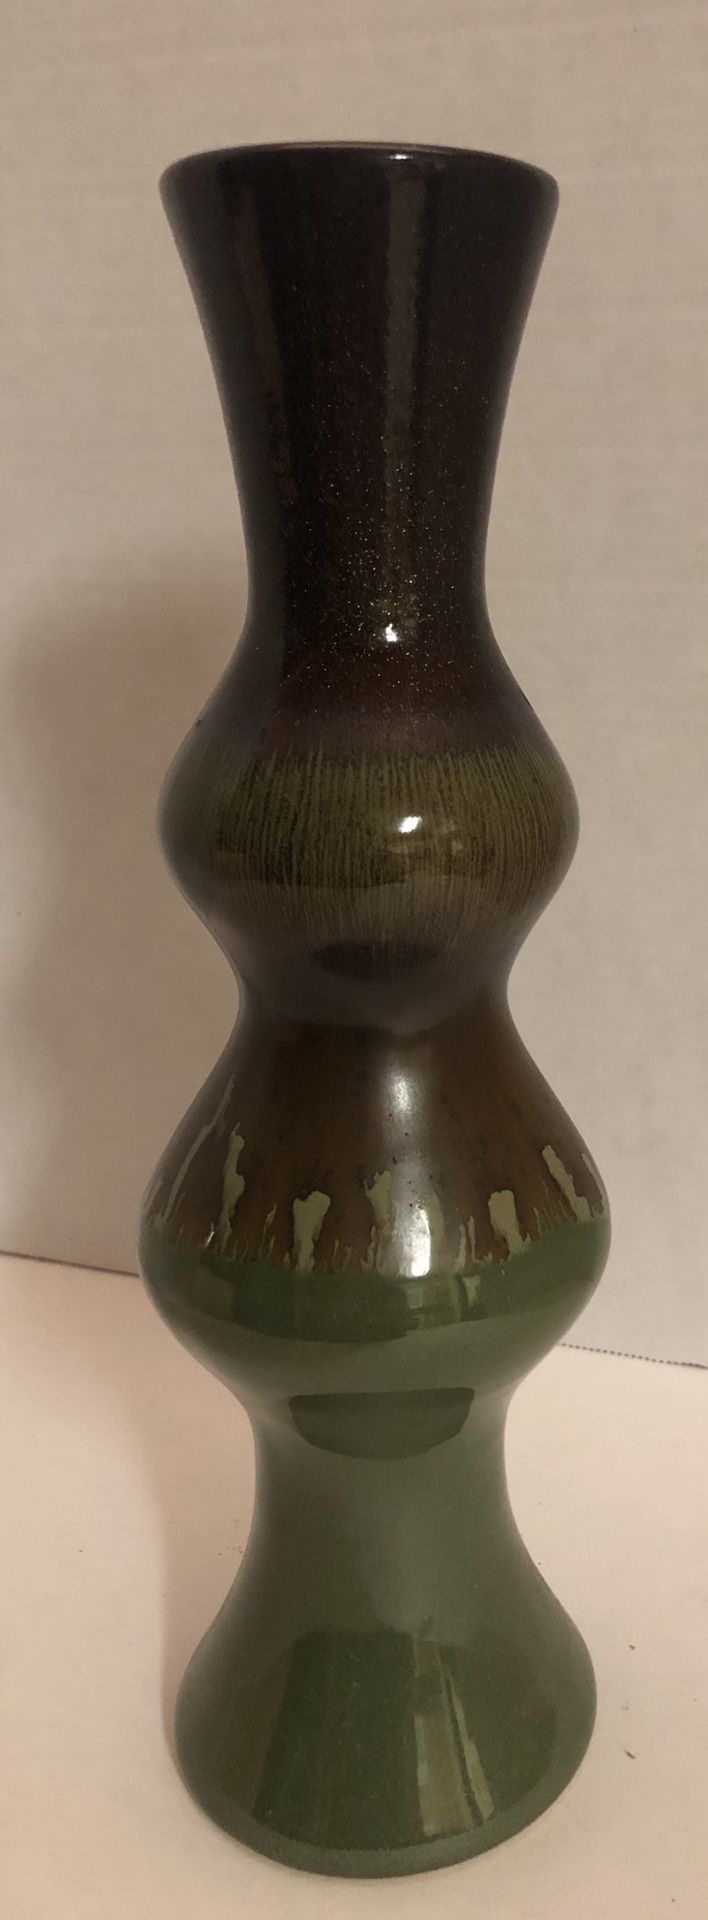 🙋‍♀️ #149 Green and Brown Vase